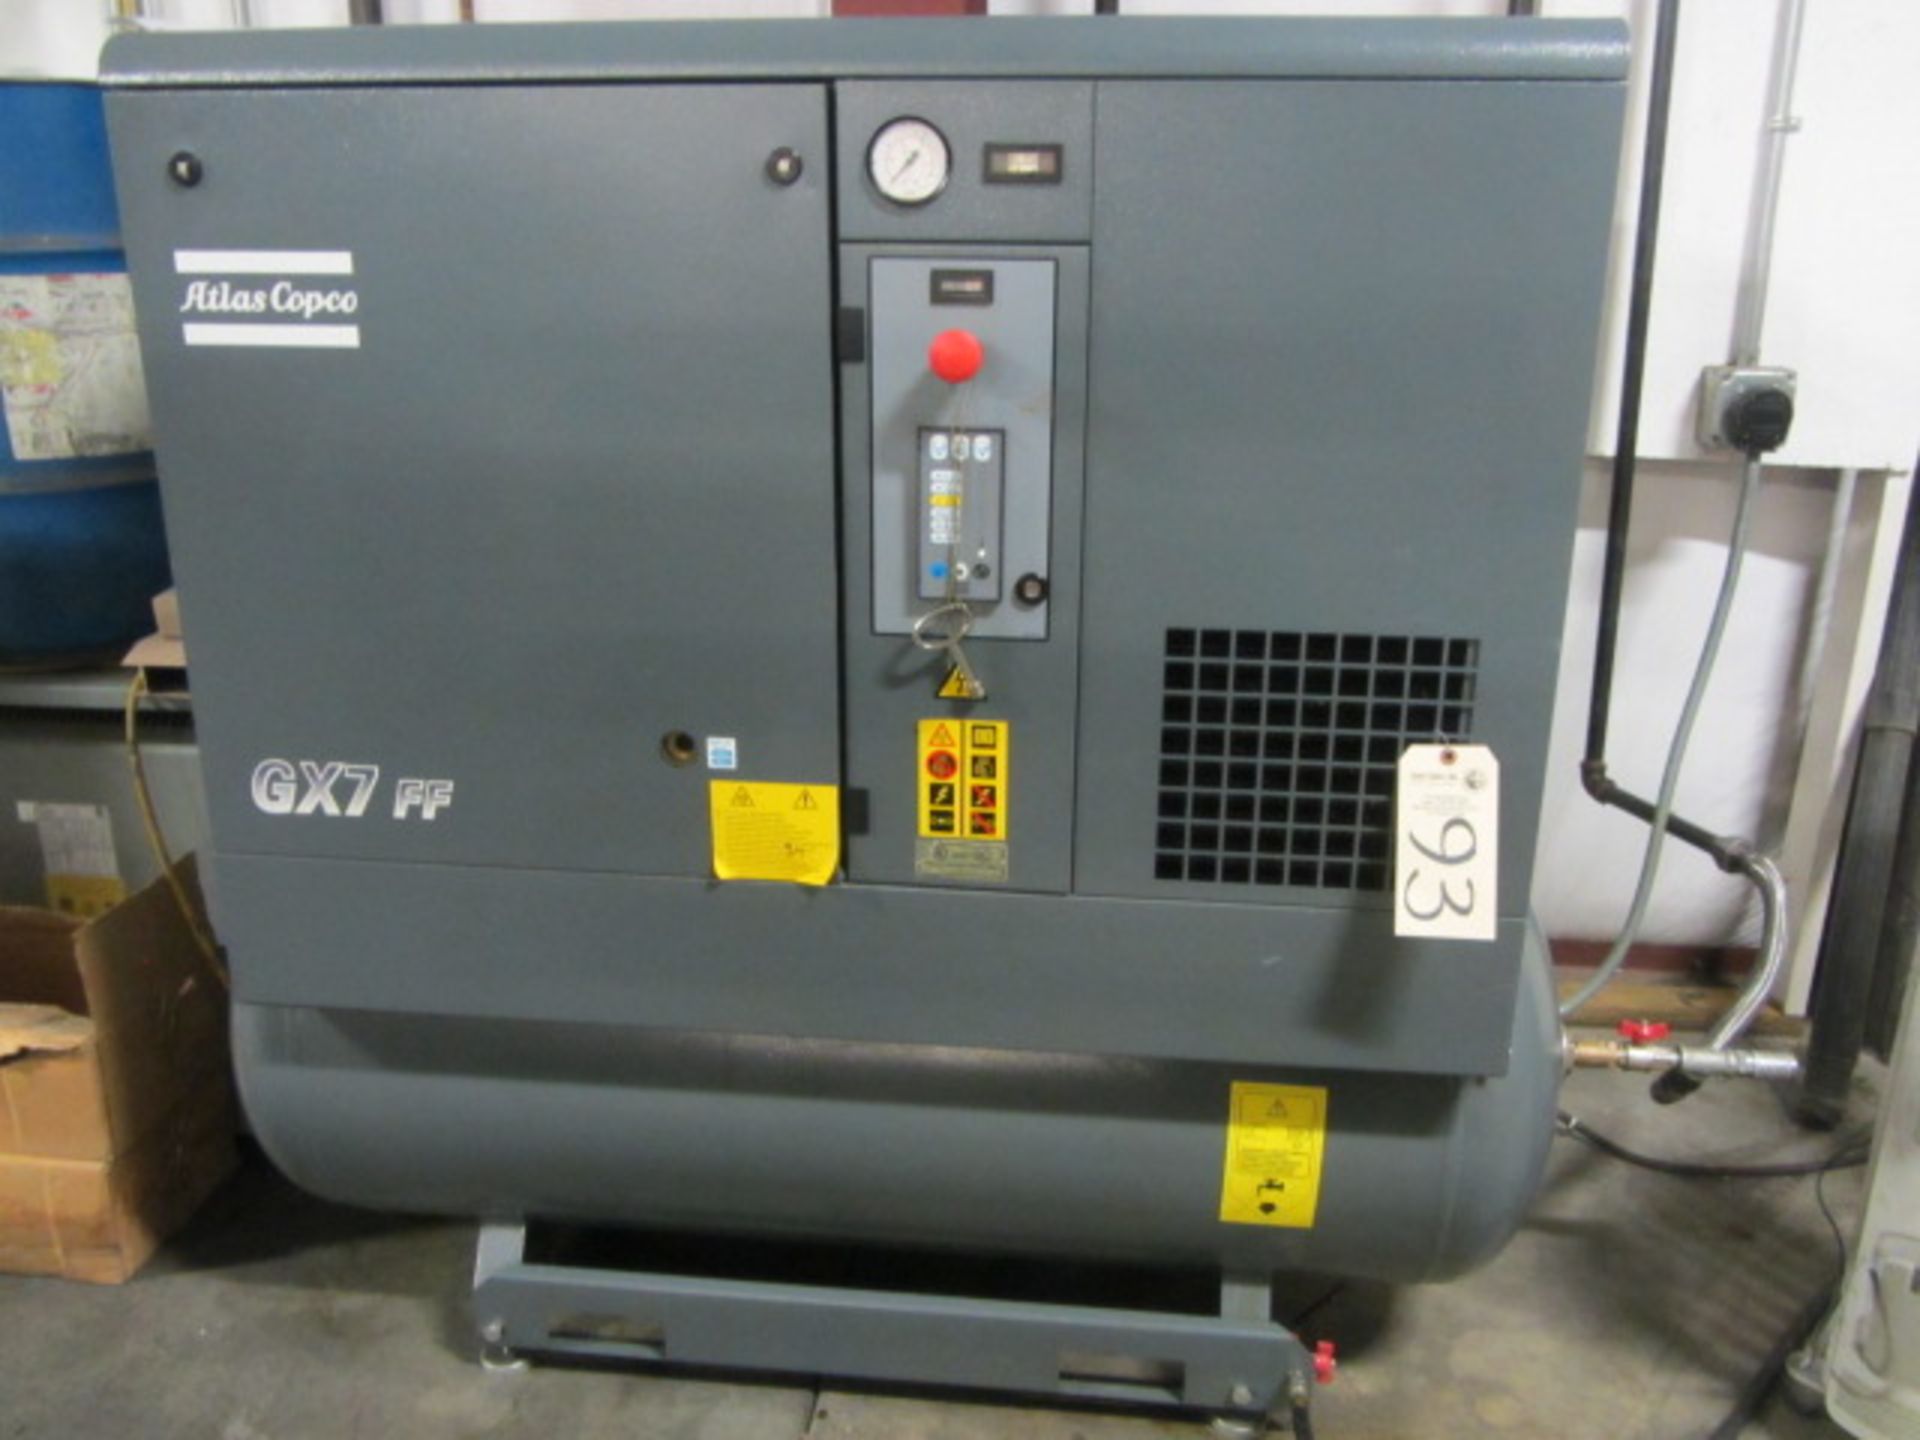 Atlas Copco GX7 FF 10HP Rotary Screw Air Compressor with Holding Tank